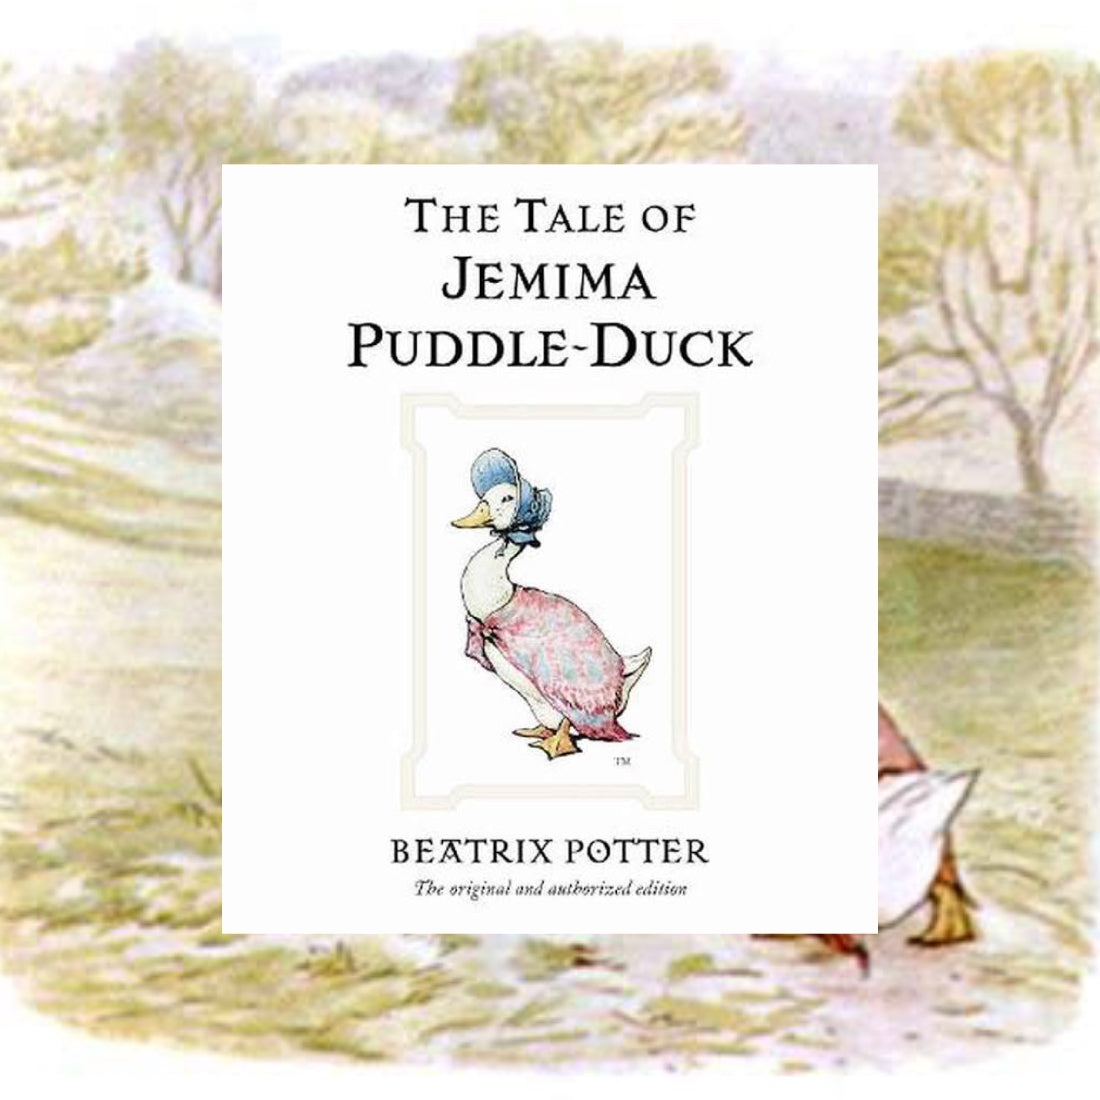 Beatrix Potter: The Tale Of Jemima Puddle Duck